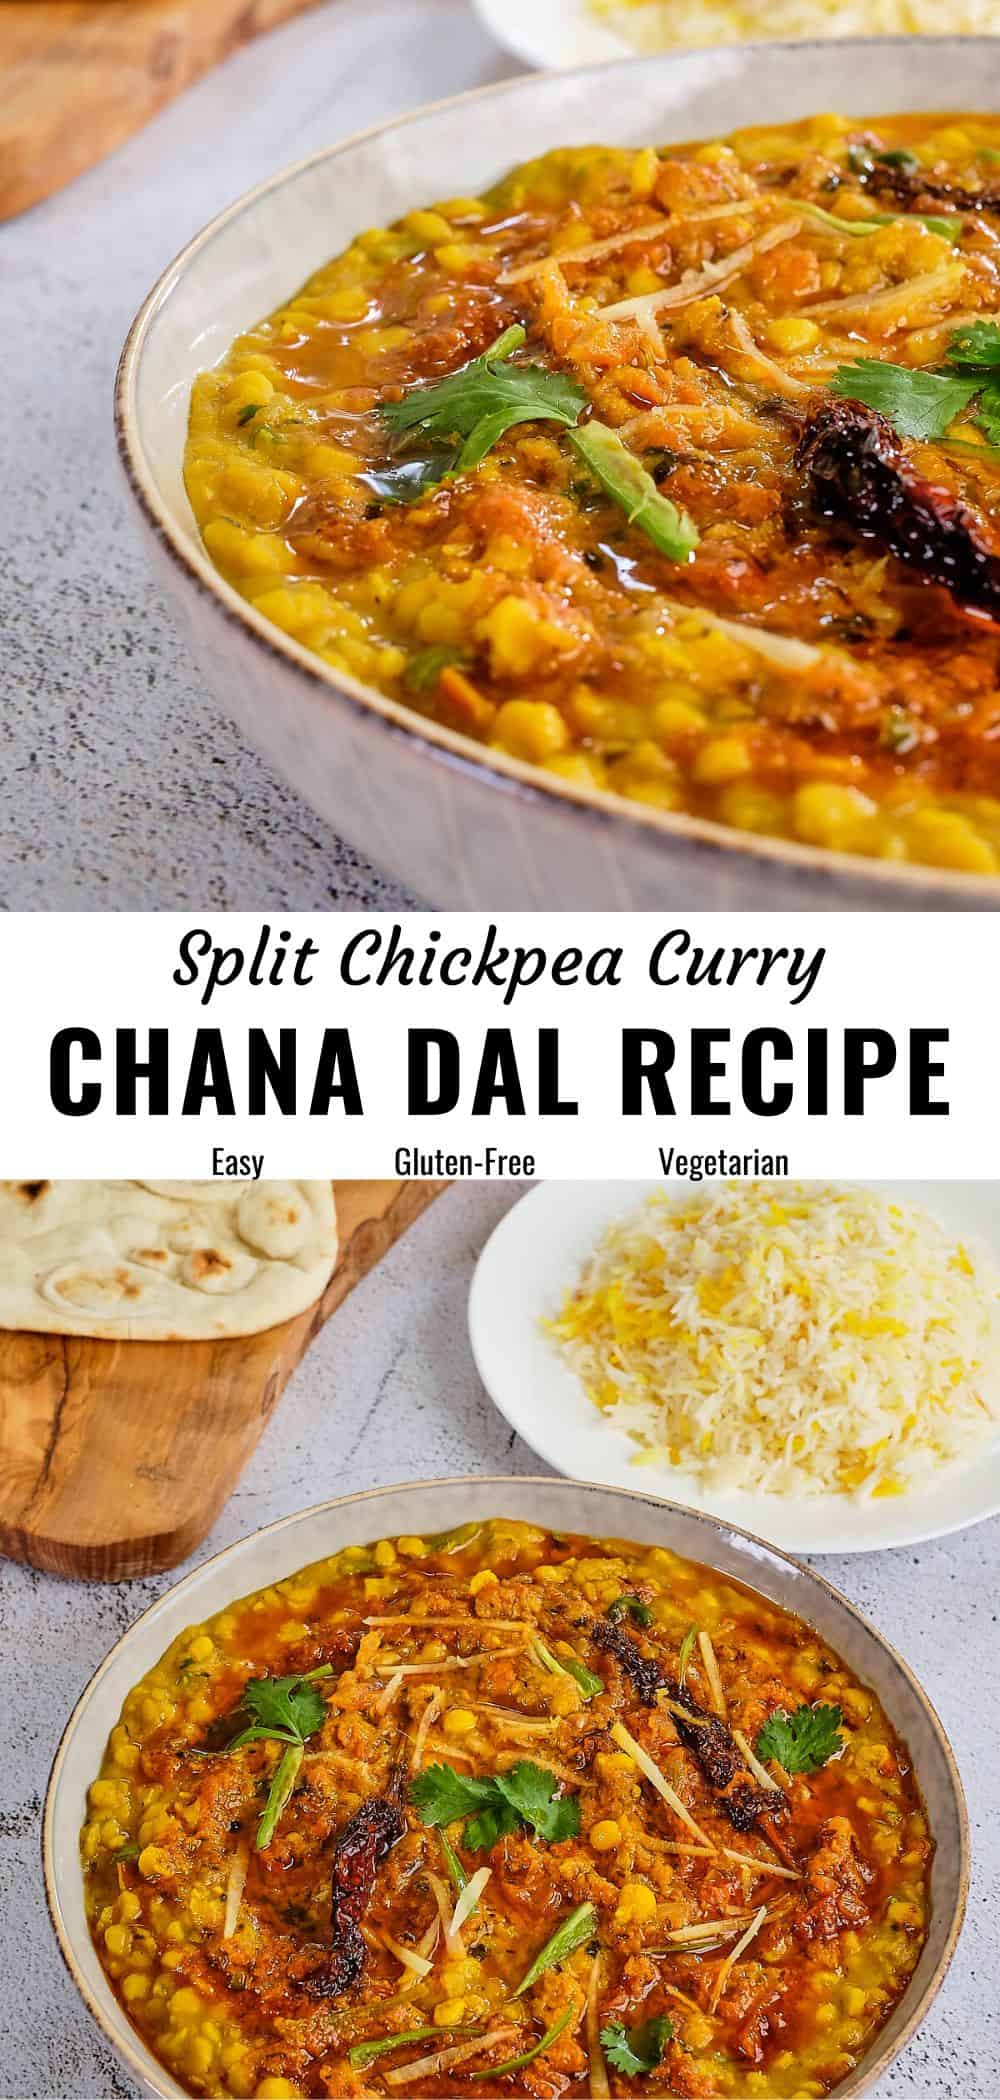 Chana Dal (Restaurant Style) - The Delicious Crescent